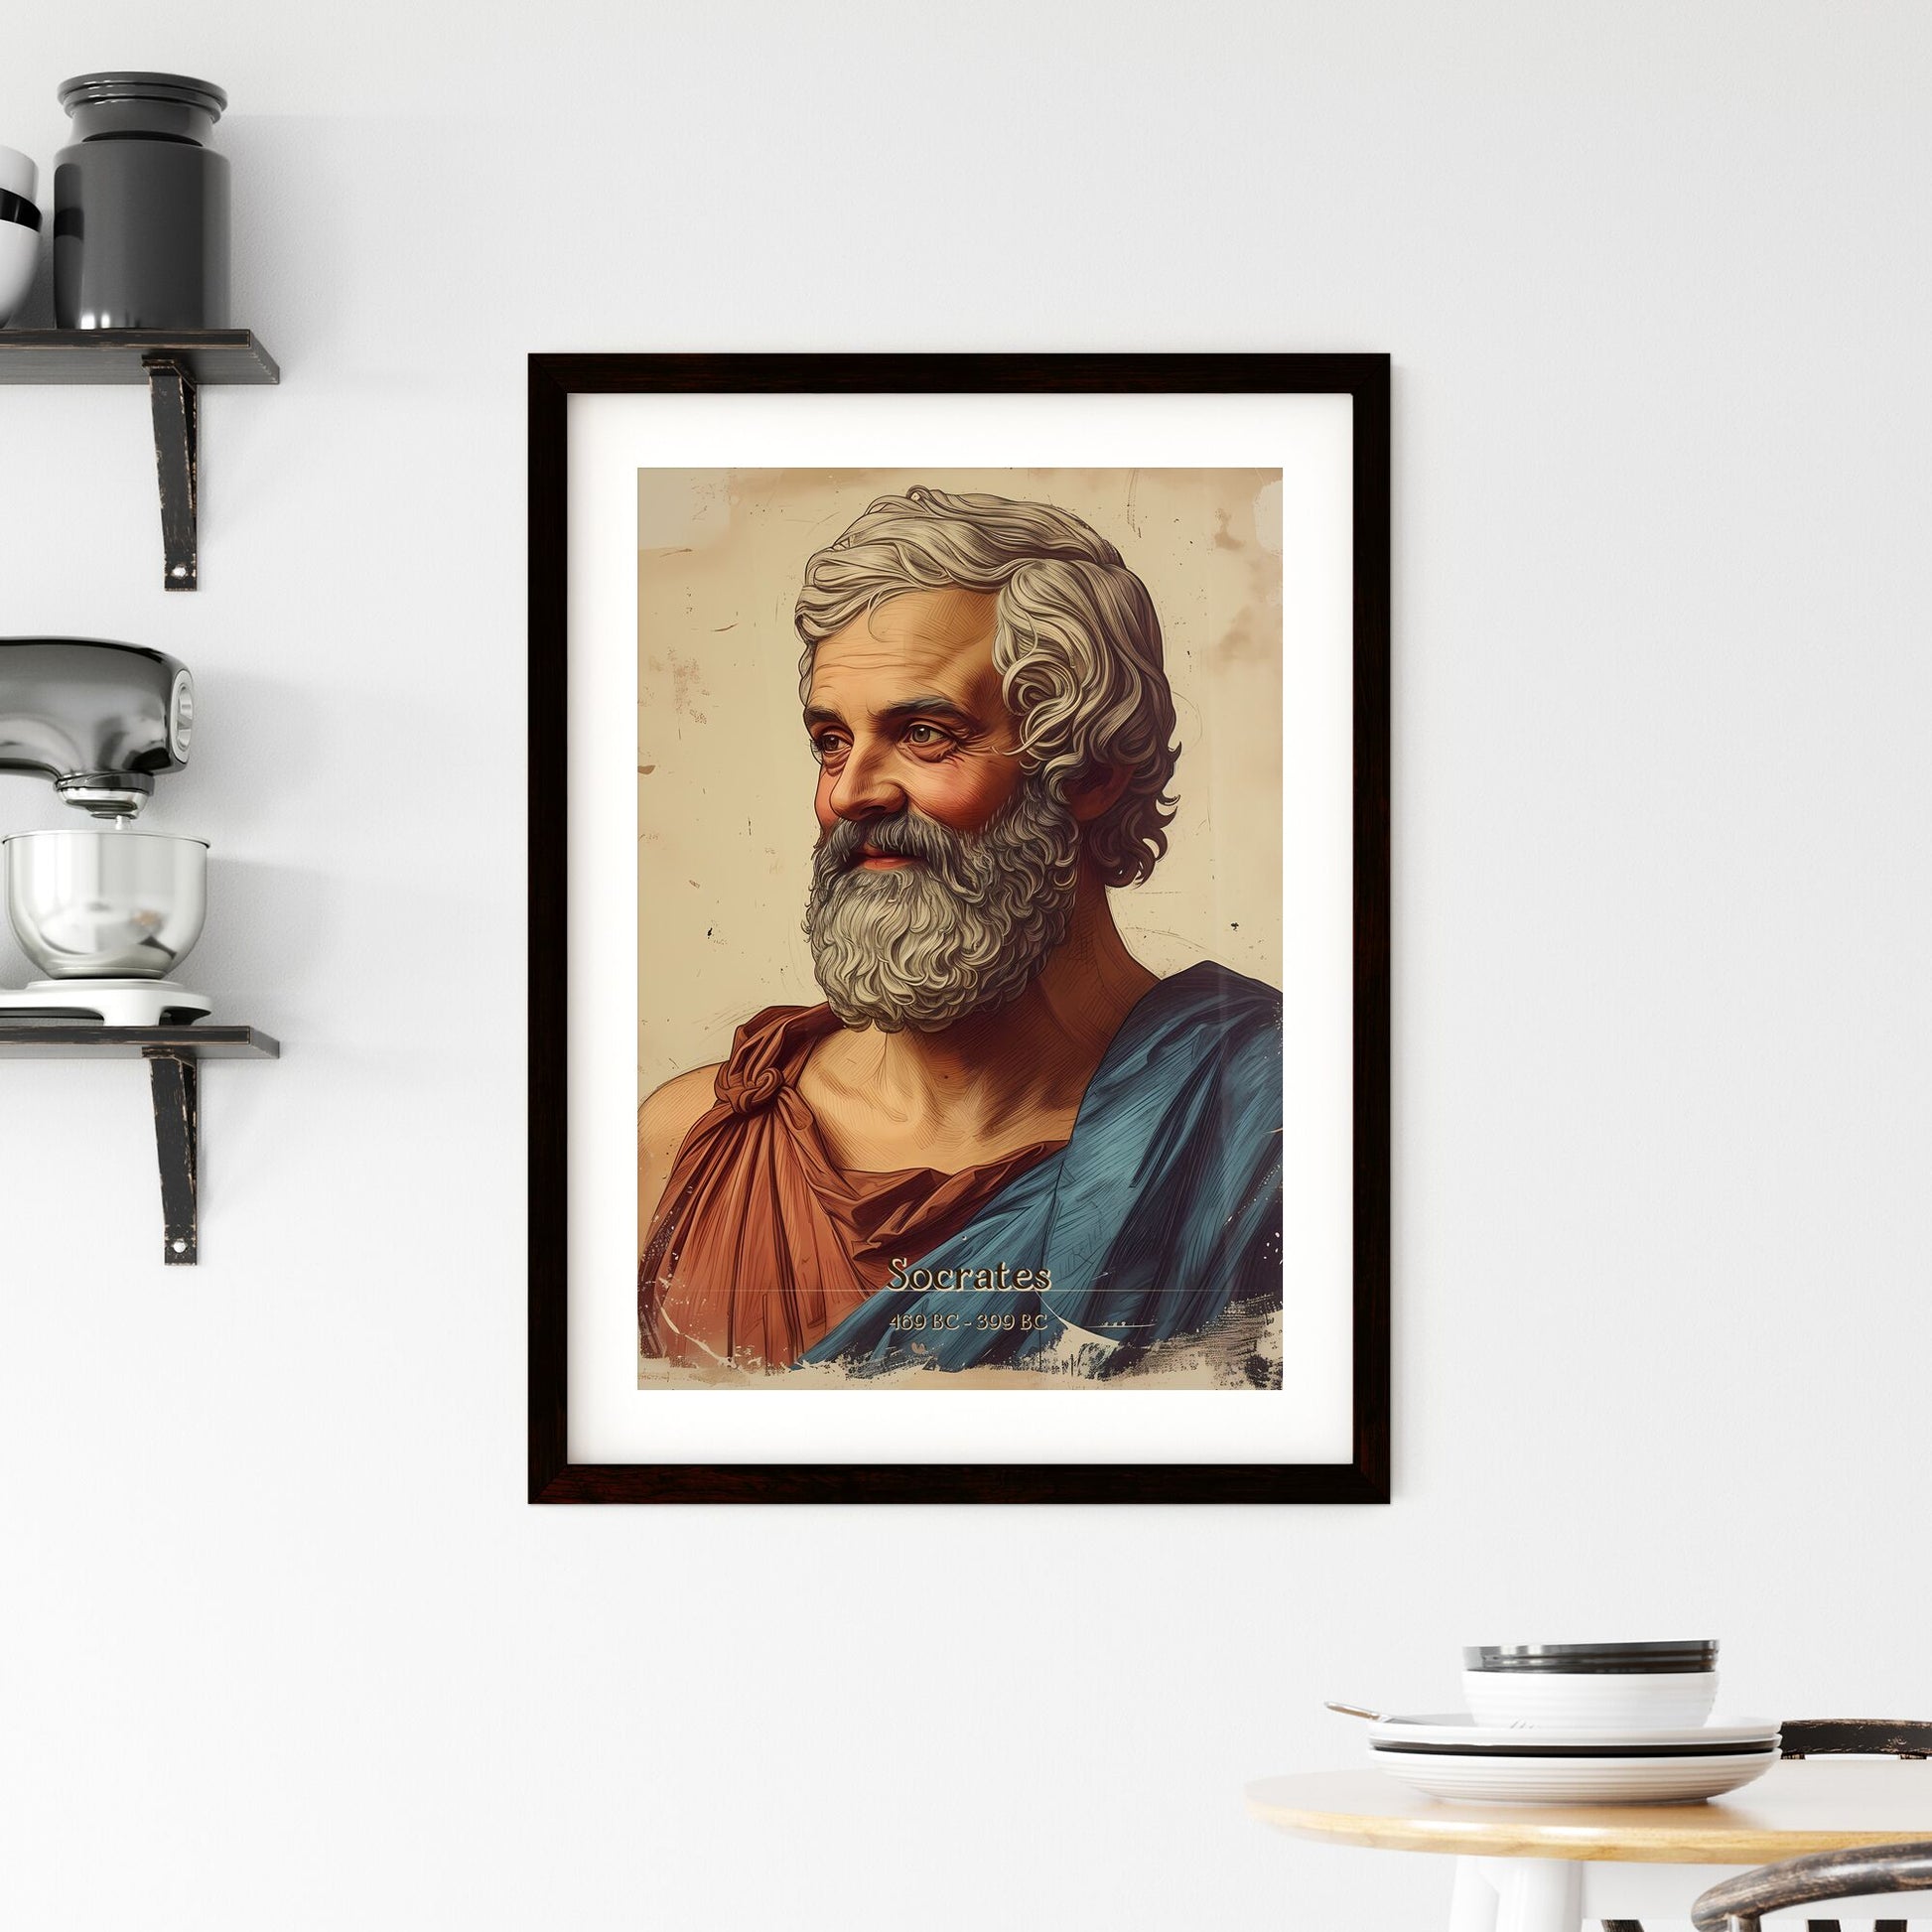 Socrates, 469 BC - 399 BC, A Poster of a man with a beard